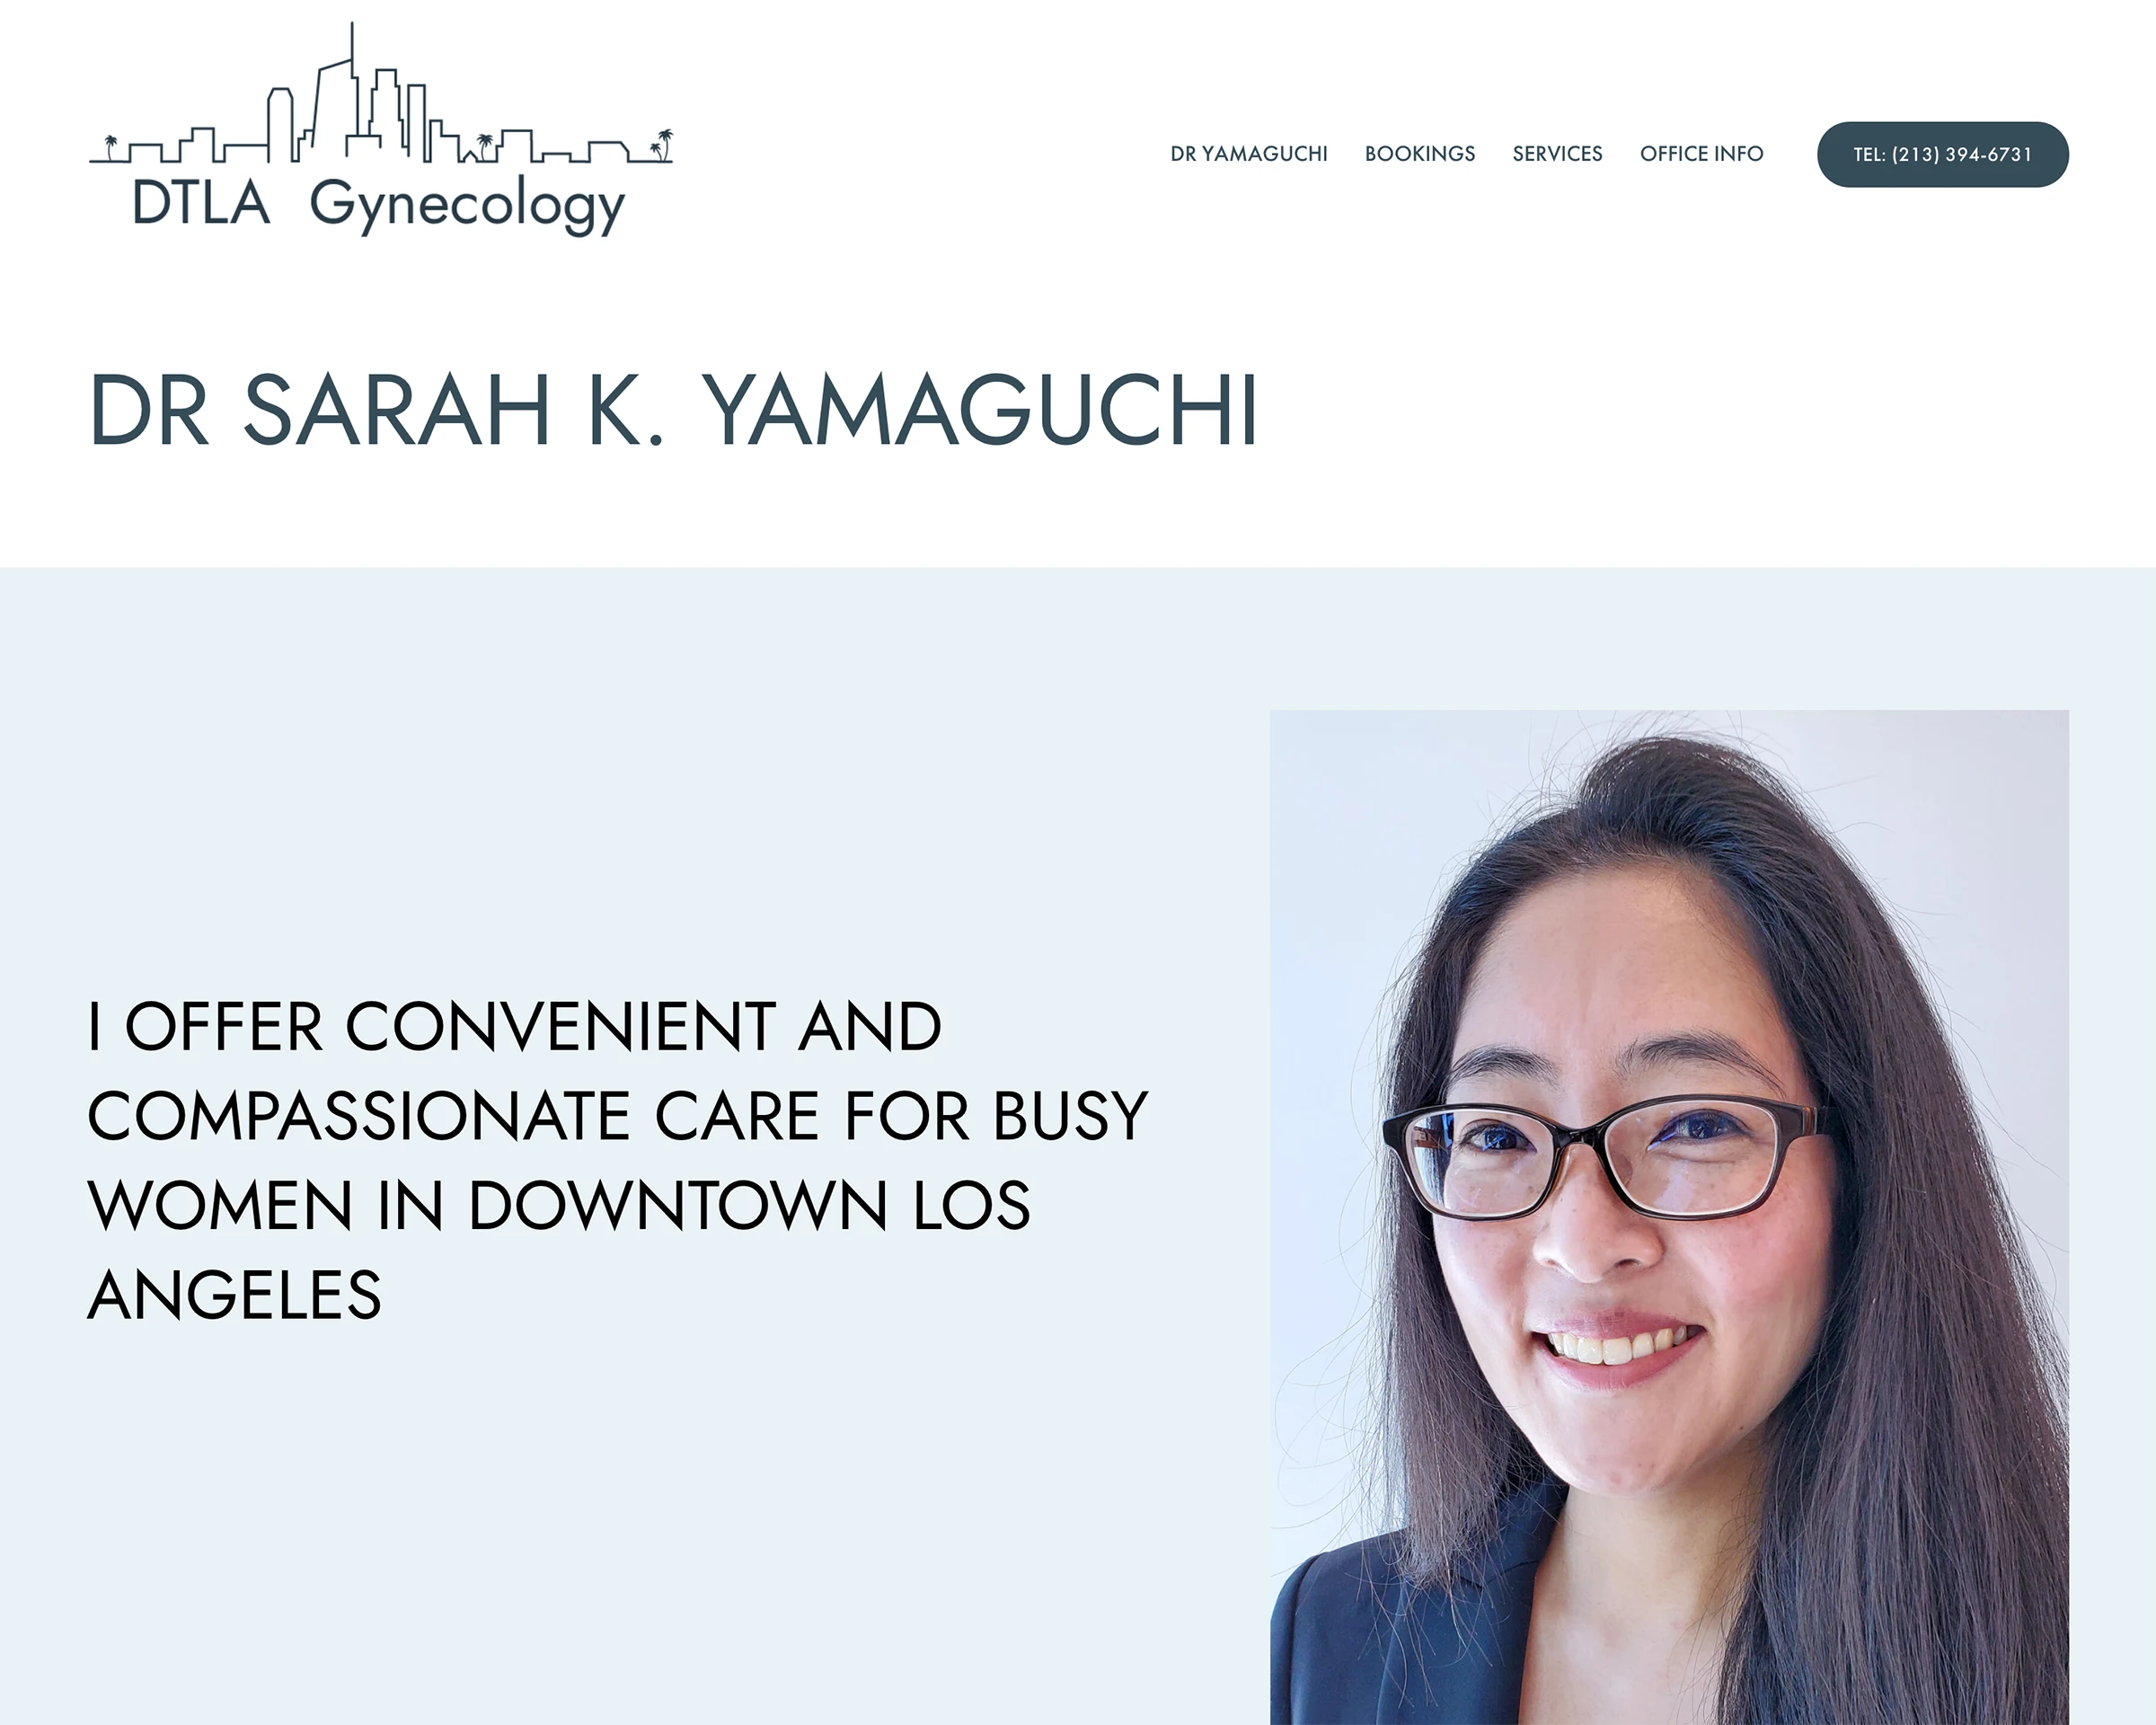  DTLA Gynecology homepage showing Dr Yamaguchi and headline offering convenient and compassionate care for busy women in Downtown Los Angeles. 